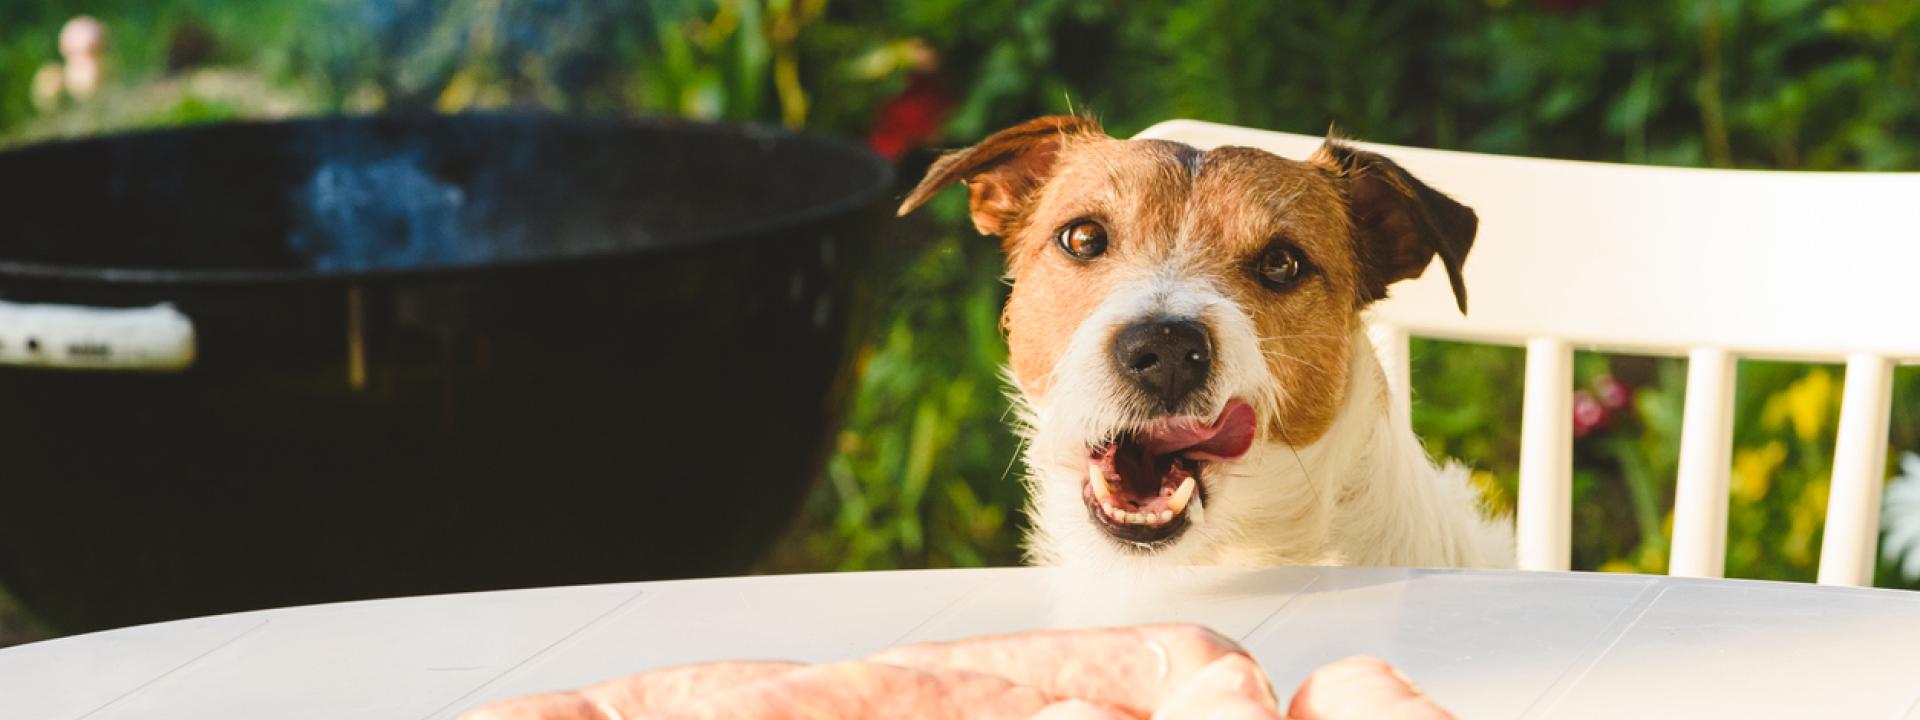 A dog licking its lips at a table with food on it